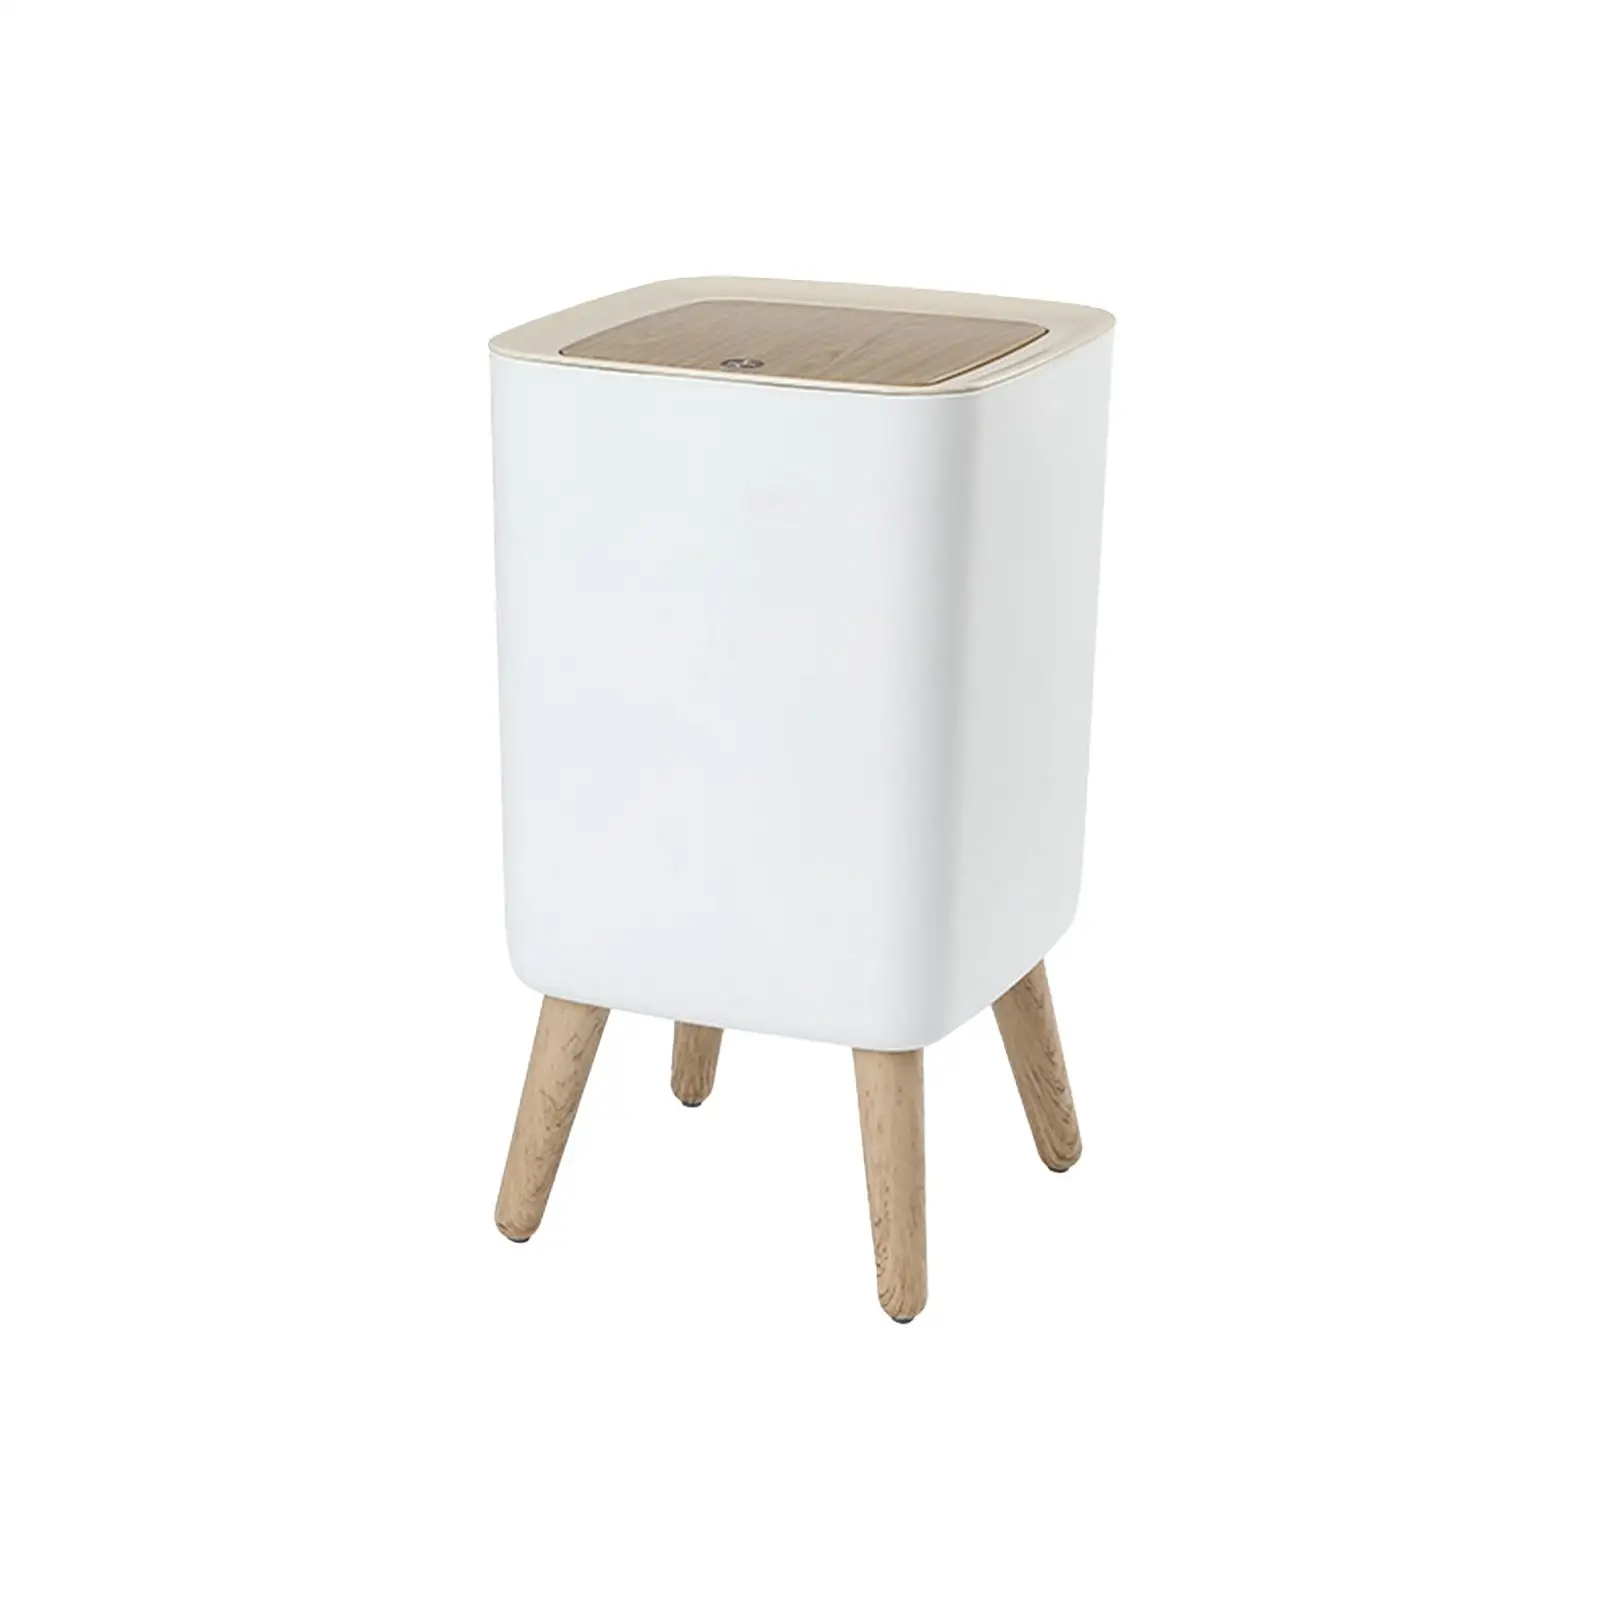 Garbage Can with Press Top Cover Trash Bin Modern for Outdoor Bedroom Kitchen